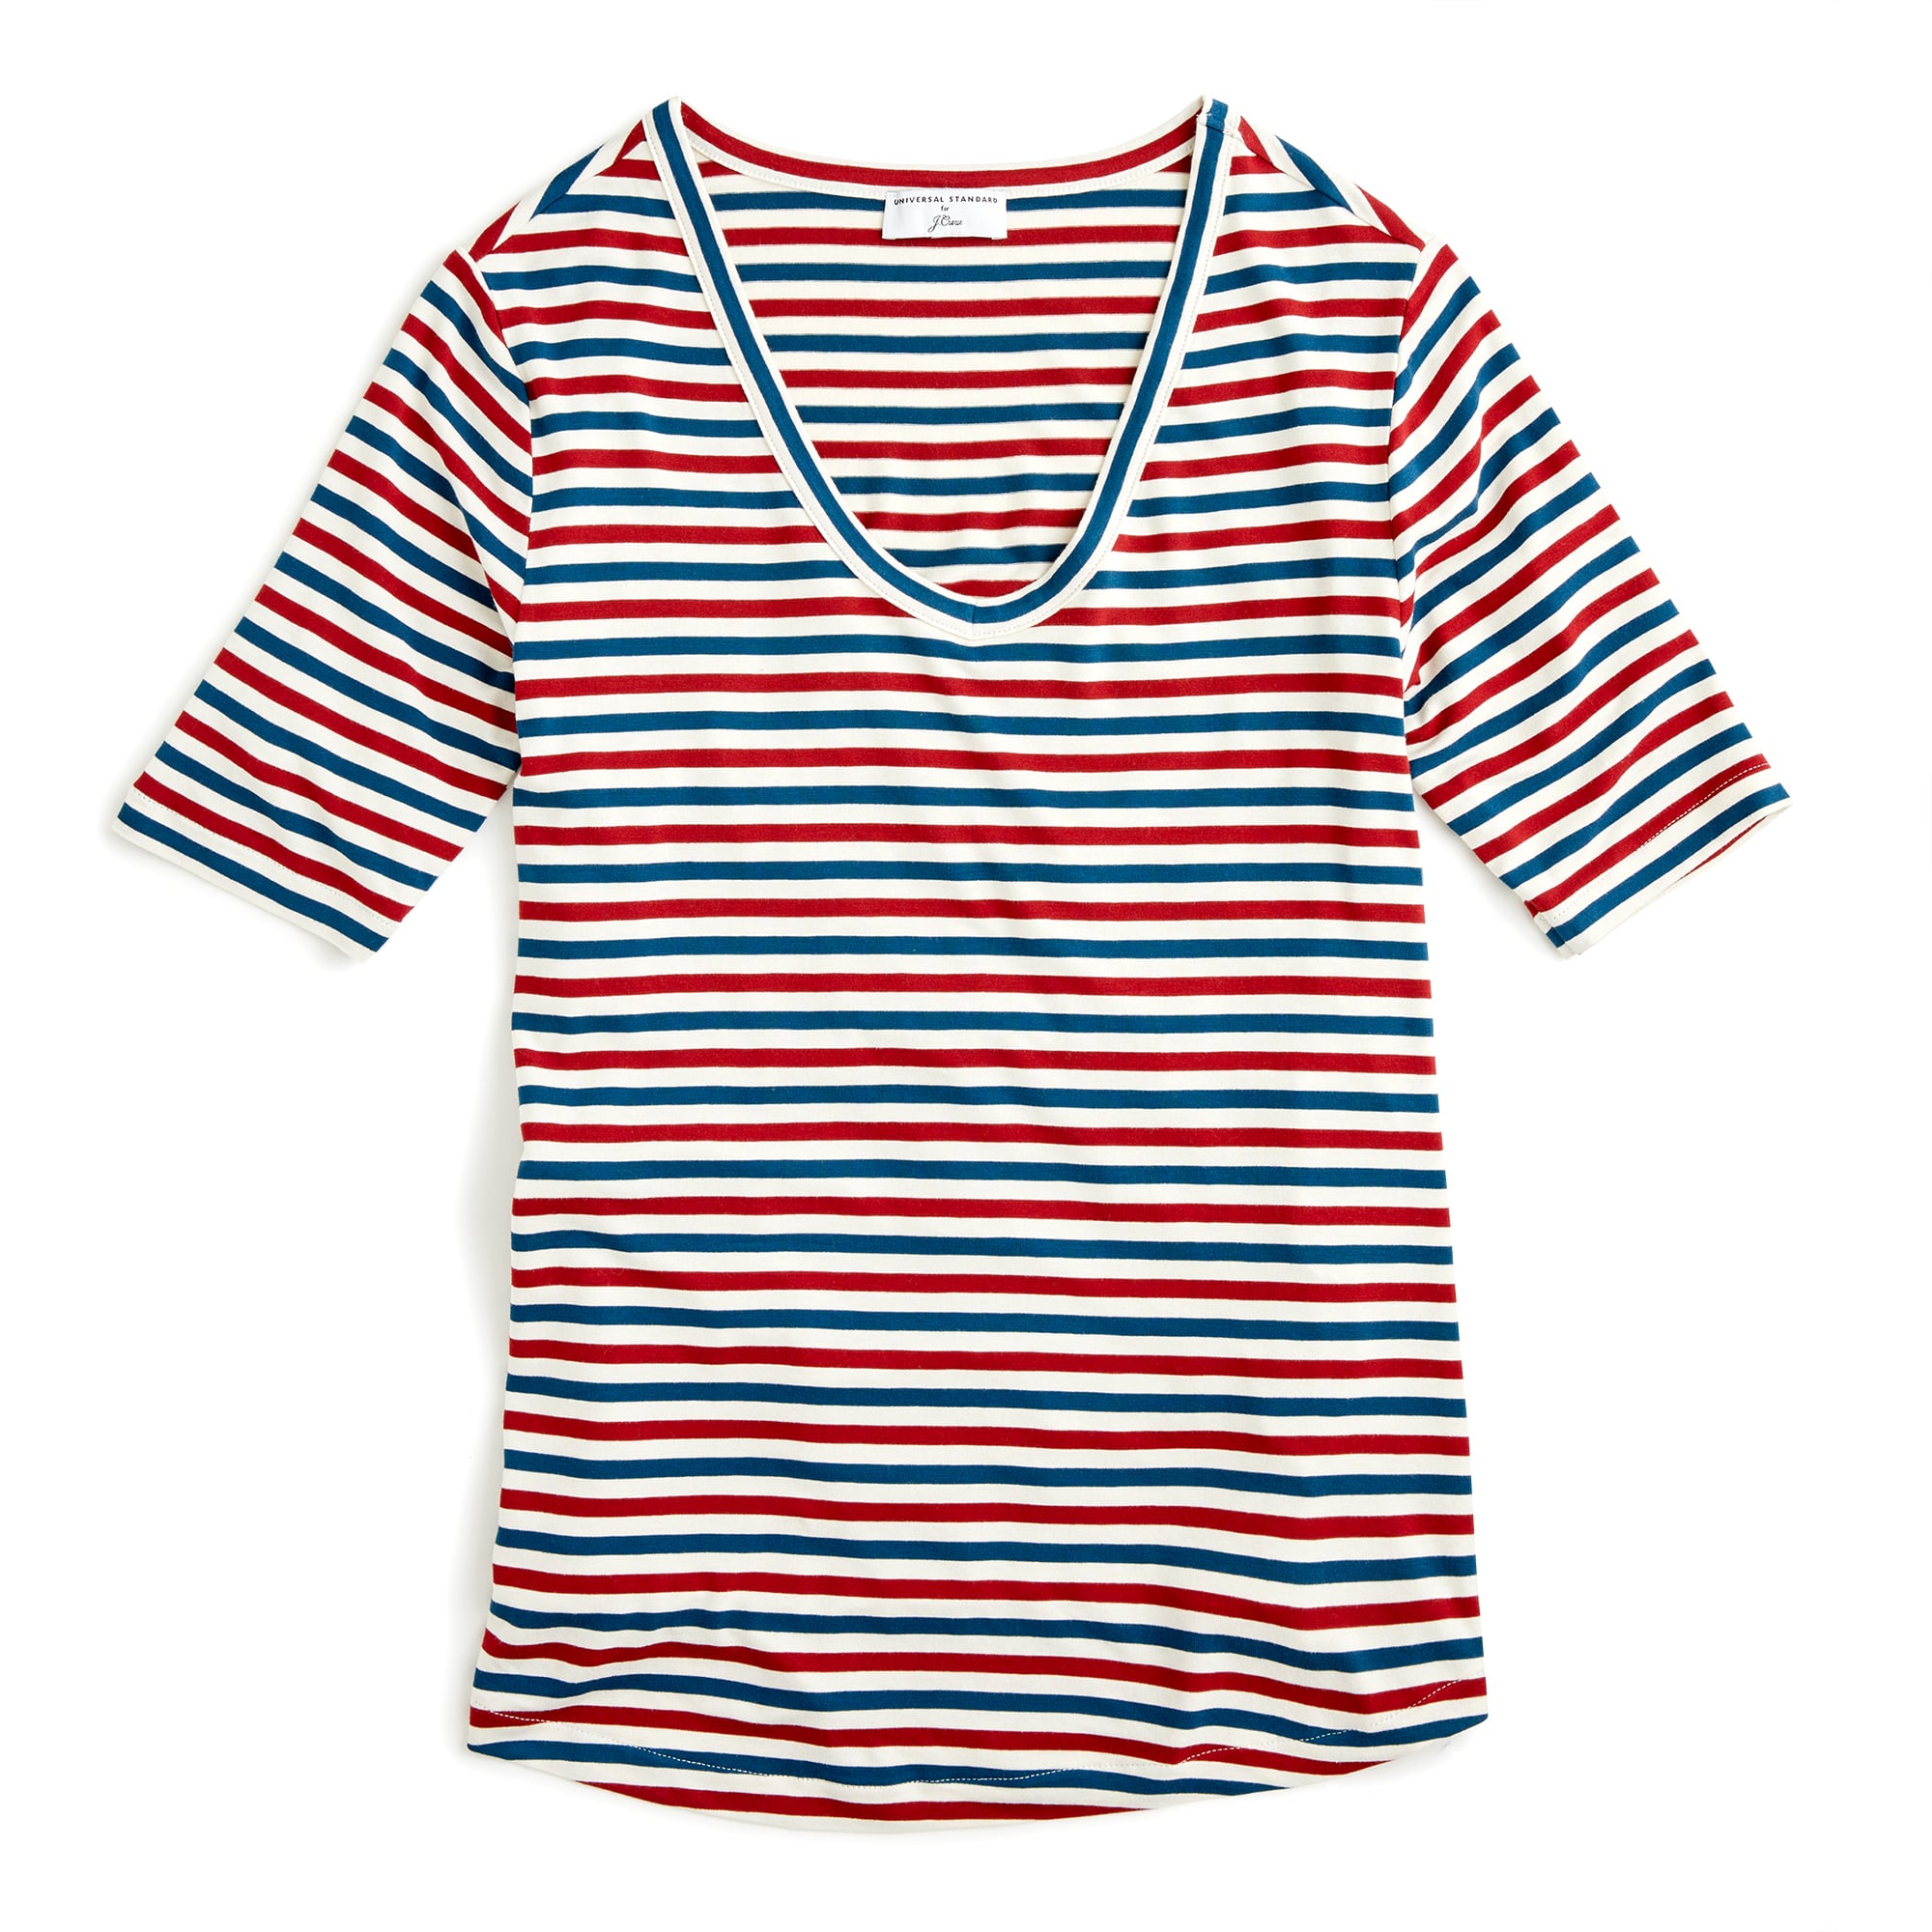 Universal Standard X J Crew Jersey V Neck T Shirt In Stripe The J Crew X Universal Standard Collaboration Is So Damn Chic You Ll Want To Buy It All Popsugar Fashion Photo 33